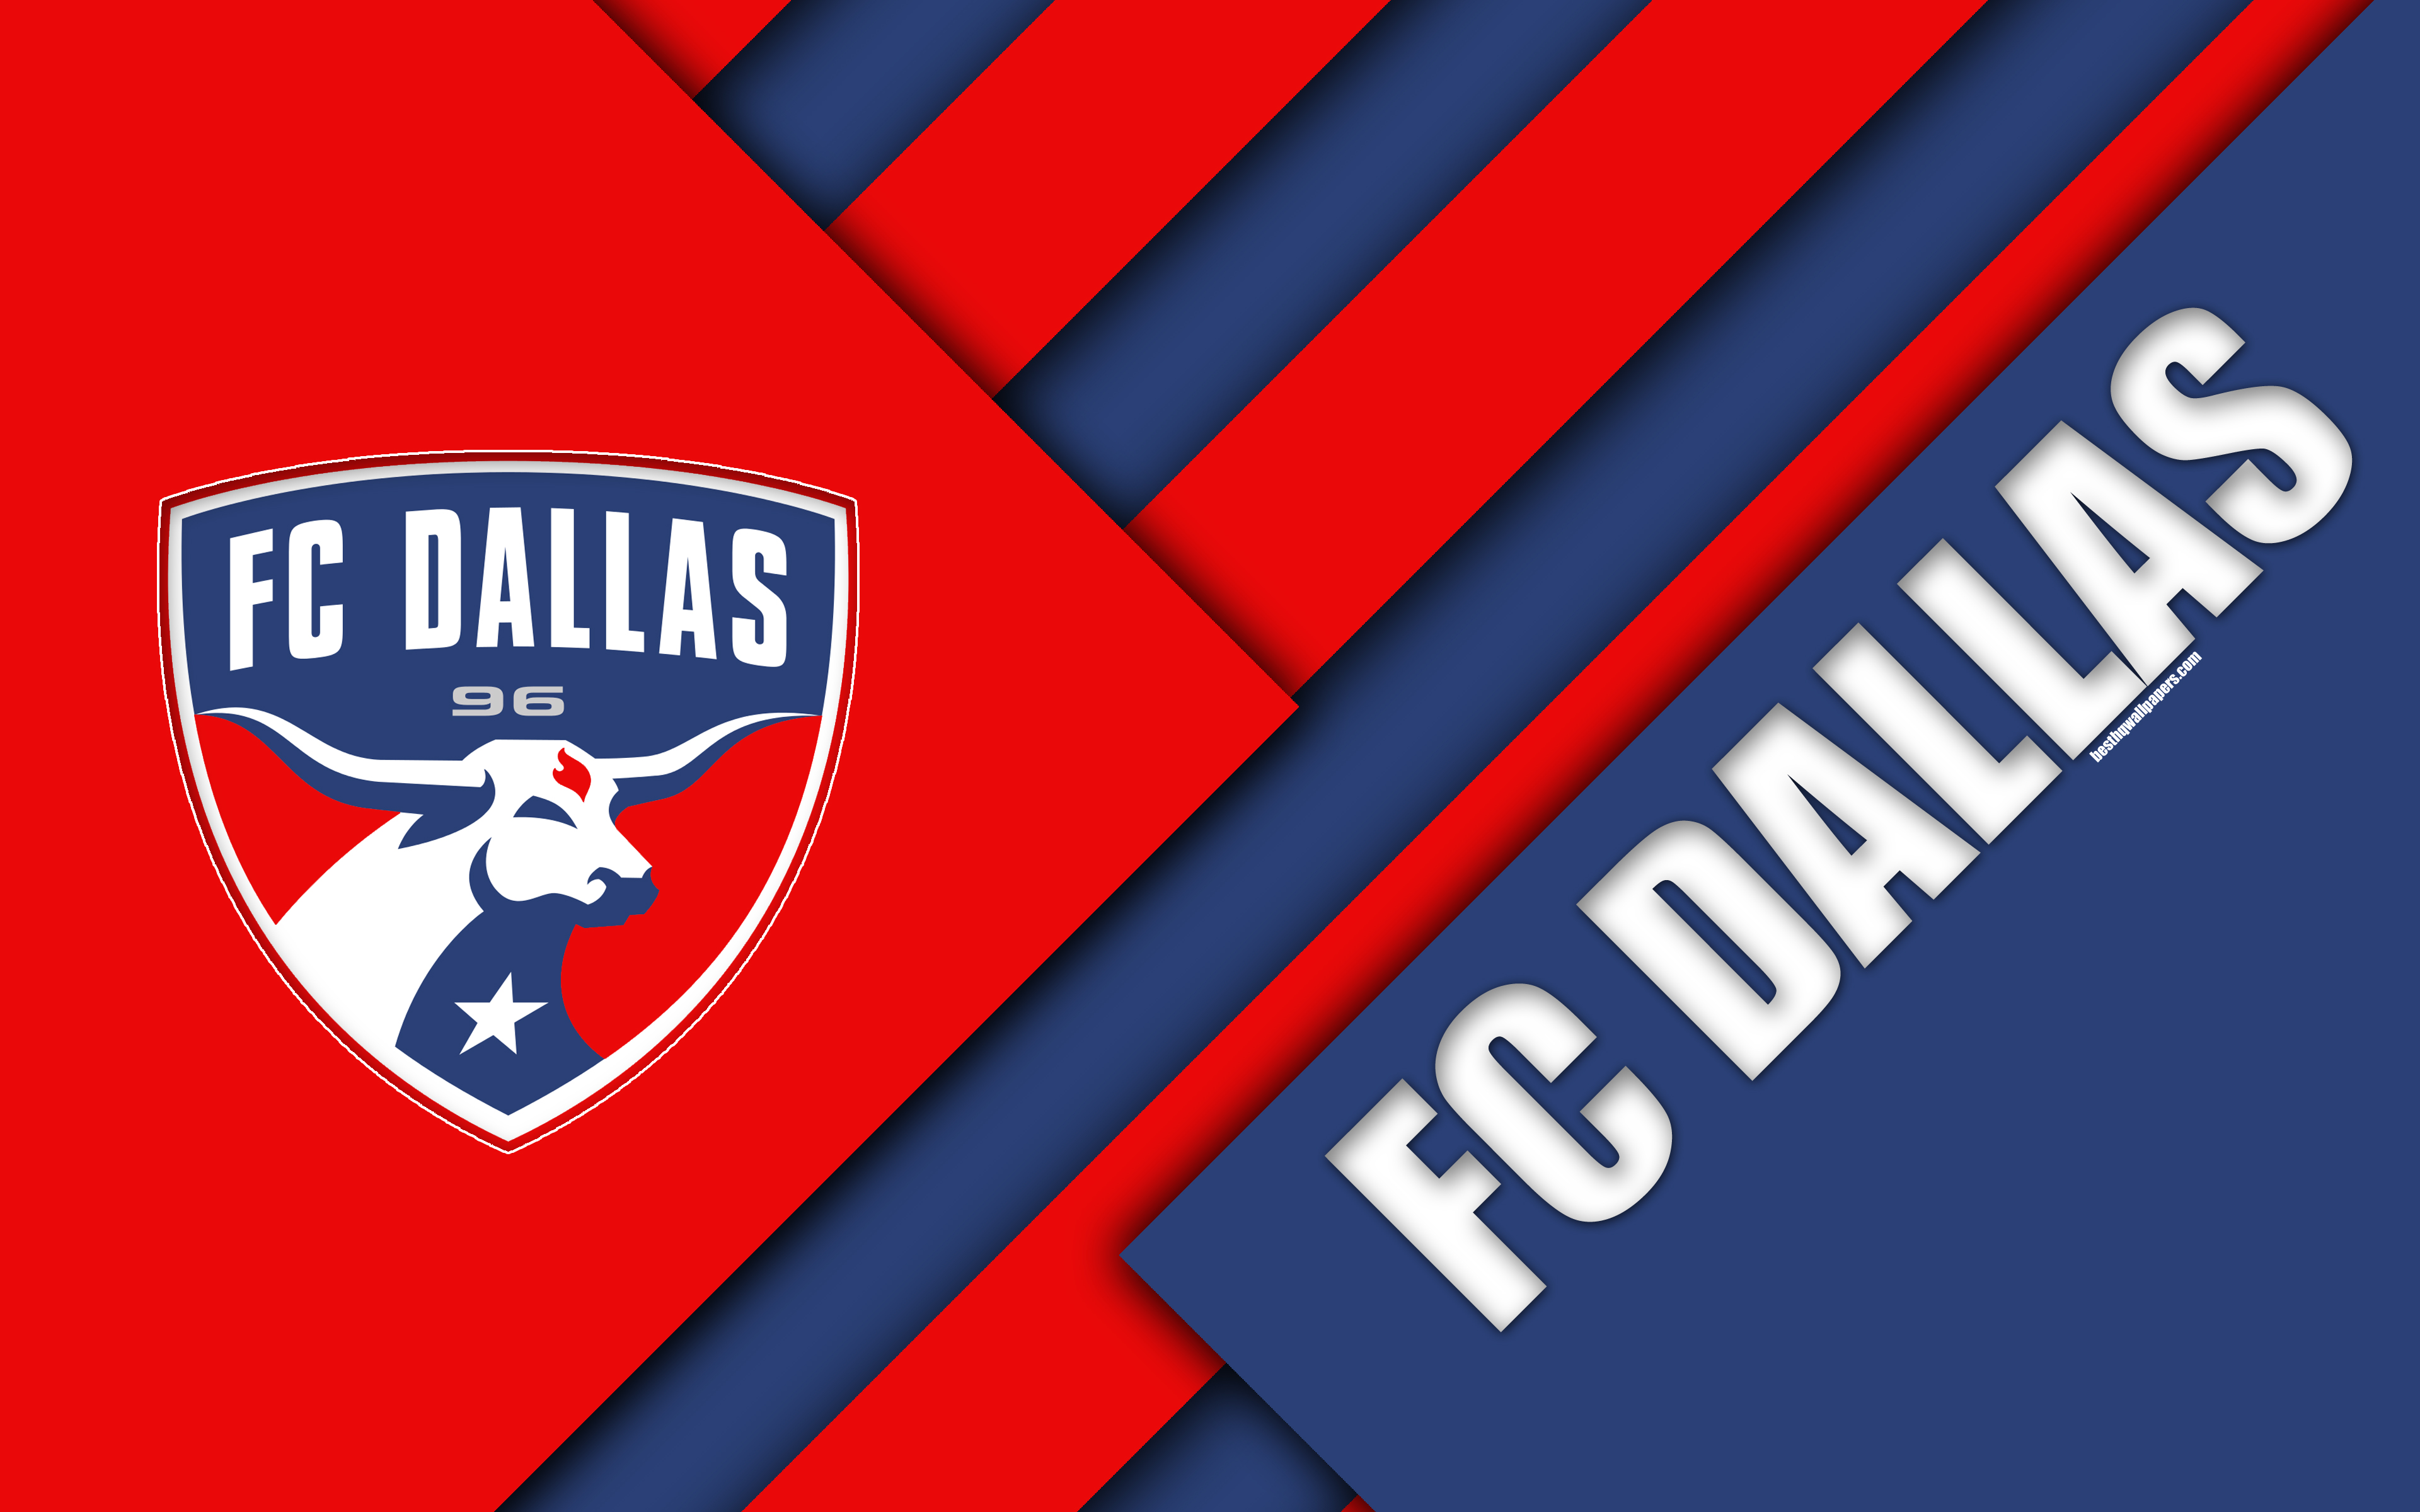 FC Dallas on X Download a fresh background for your  Both horizontal  and vertical graphics available httpstcoiiieAf1BwF  httpstcoYmiLPUZS0I  X